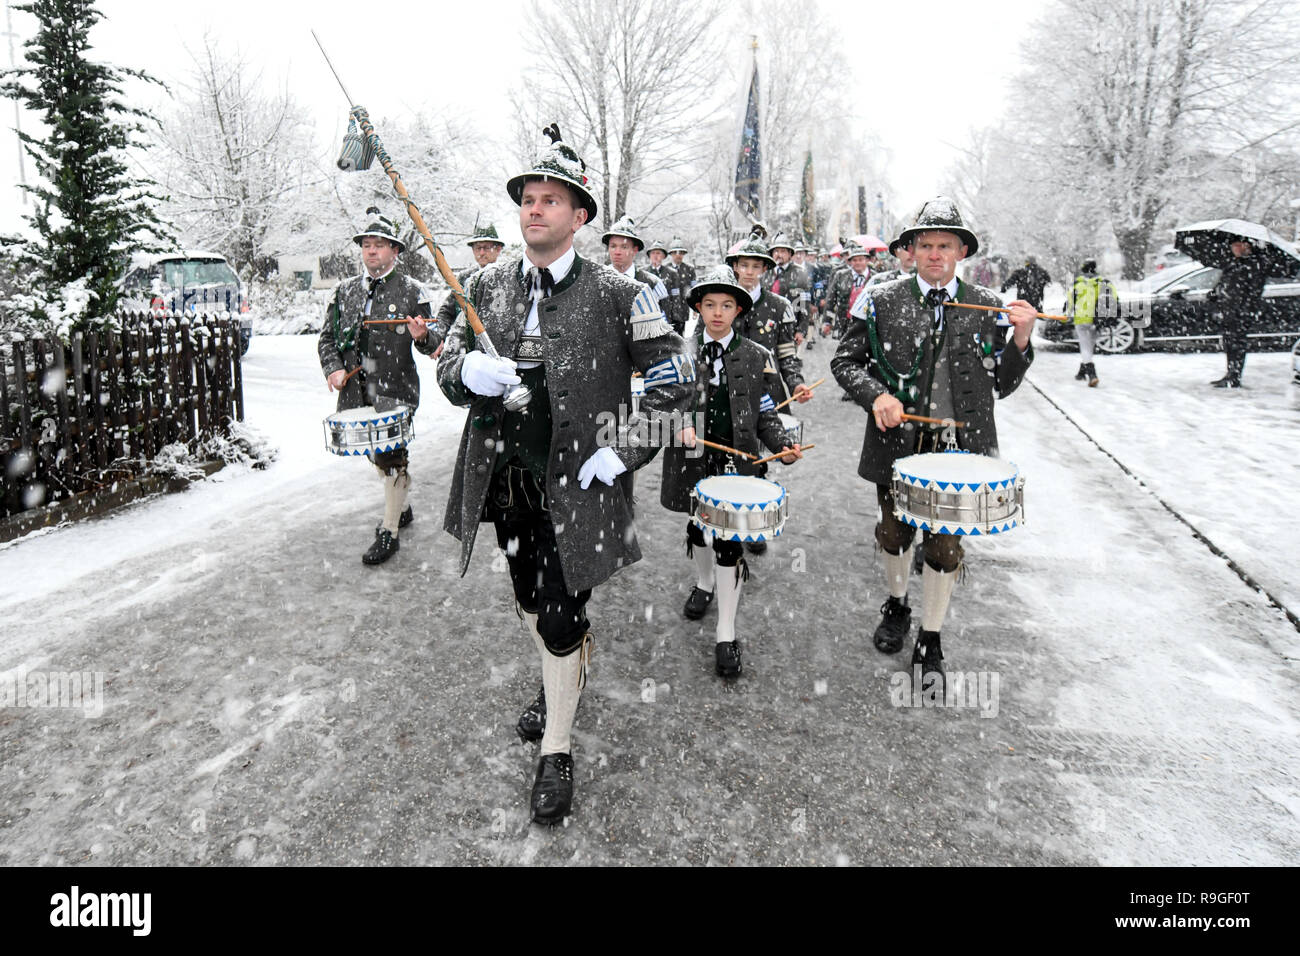 Waakirchen, Germany. 24th Dec, 2018. Mountain troops take part in a snowfall commemoration ceremony in Waakirchen (Bavaria) for the victims of the 'Sendlinger Mordweihnacht'. With a memorial service and a laying of a wreath, the participants commemorate the revolt of the Bavarian population against the Habsburg occupation, which was bloodily suppressed on Christmas Day 1705. Credit: Tobias Hase/dpa/Alamy Live News Stock Photo